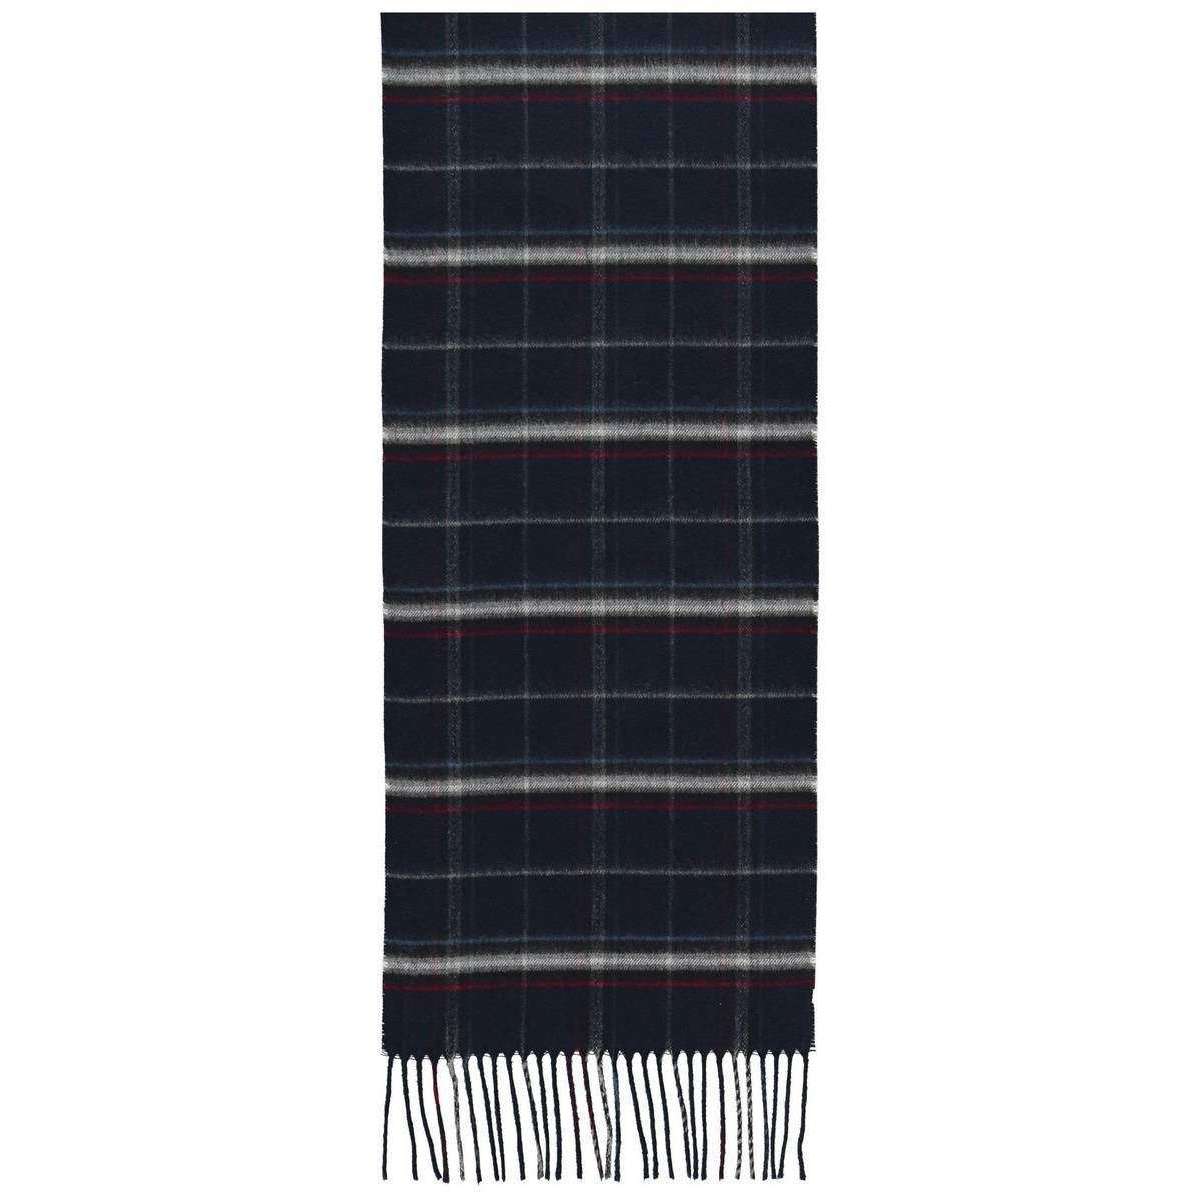 Fraas Wide Check Scarf - Navy